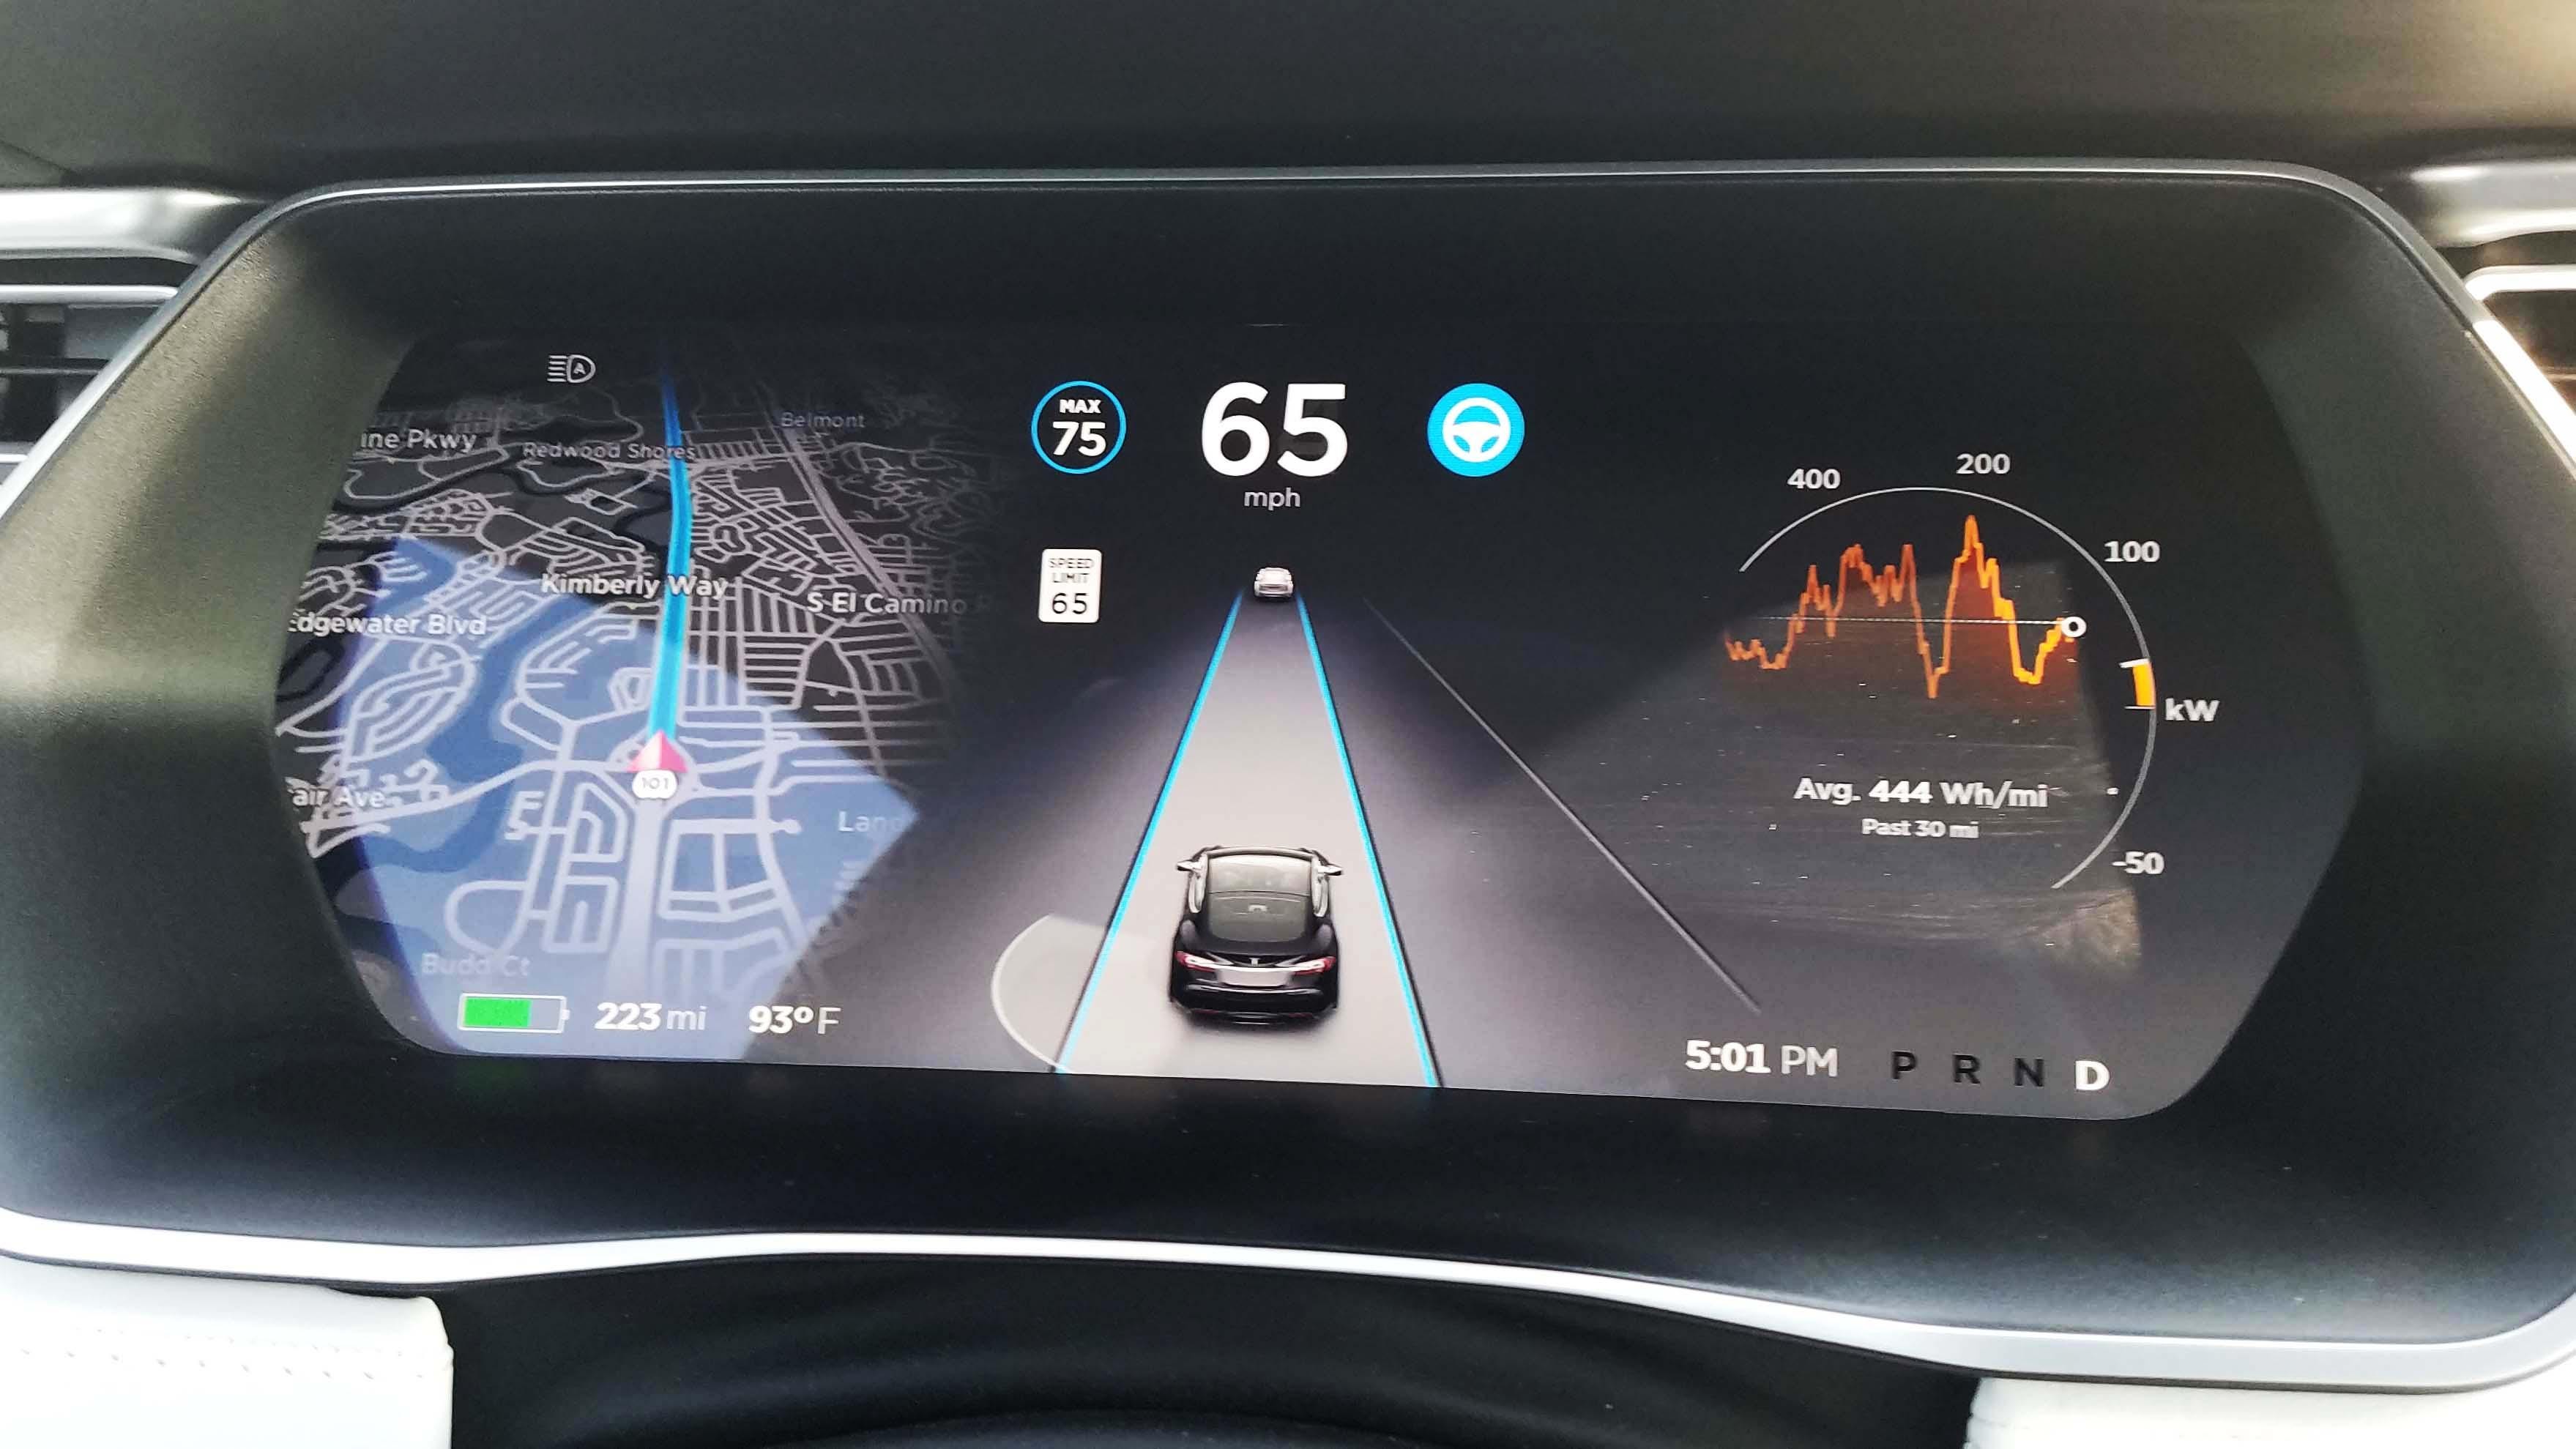 California officers recently faced the challenge of stopping a Tesla being navigated by its Autopilot system with a sleeping man at the wheel.